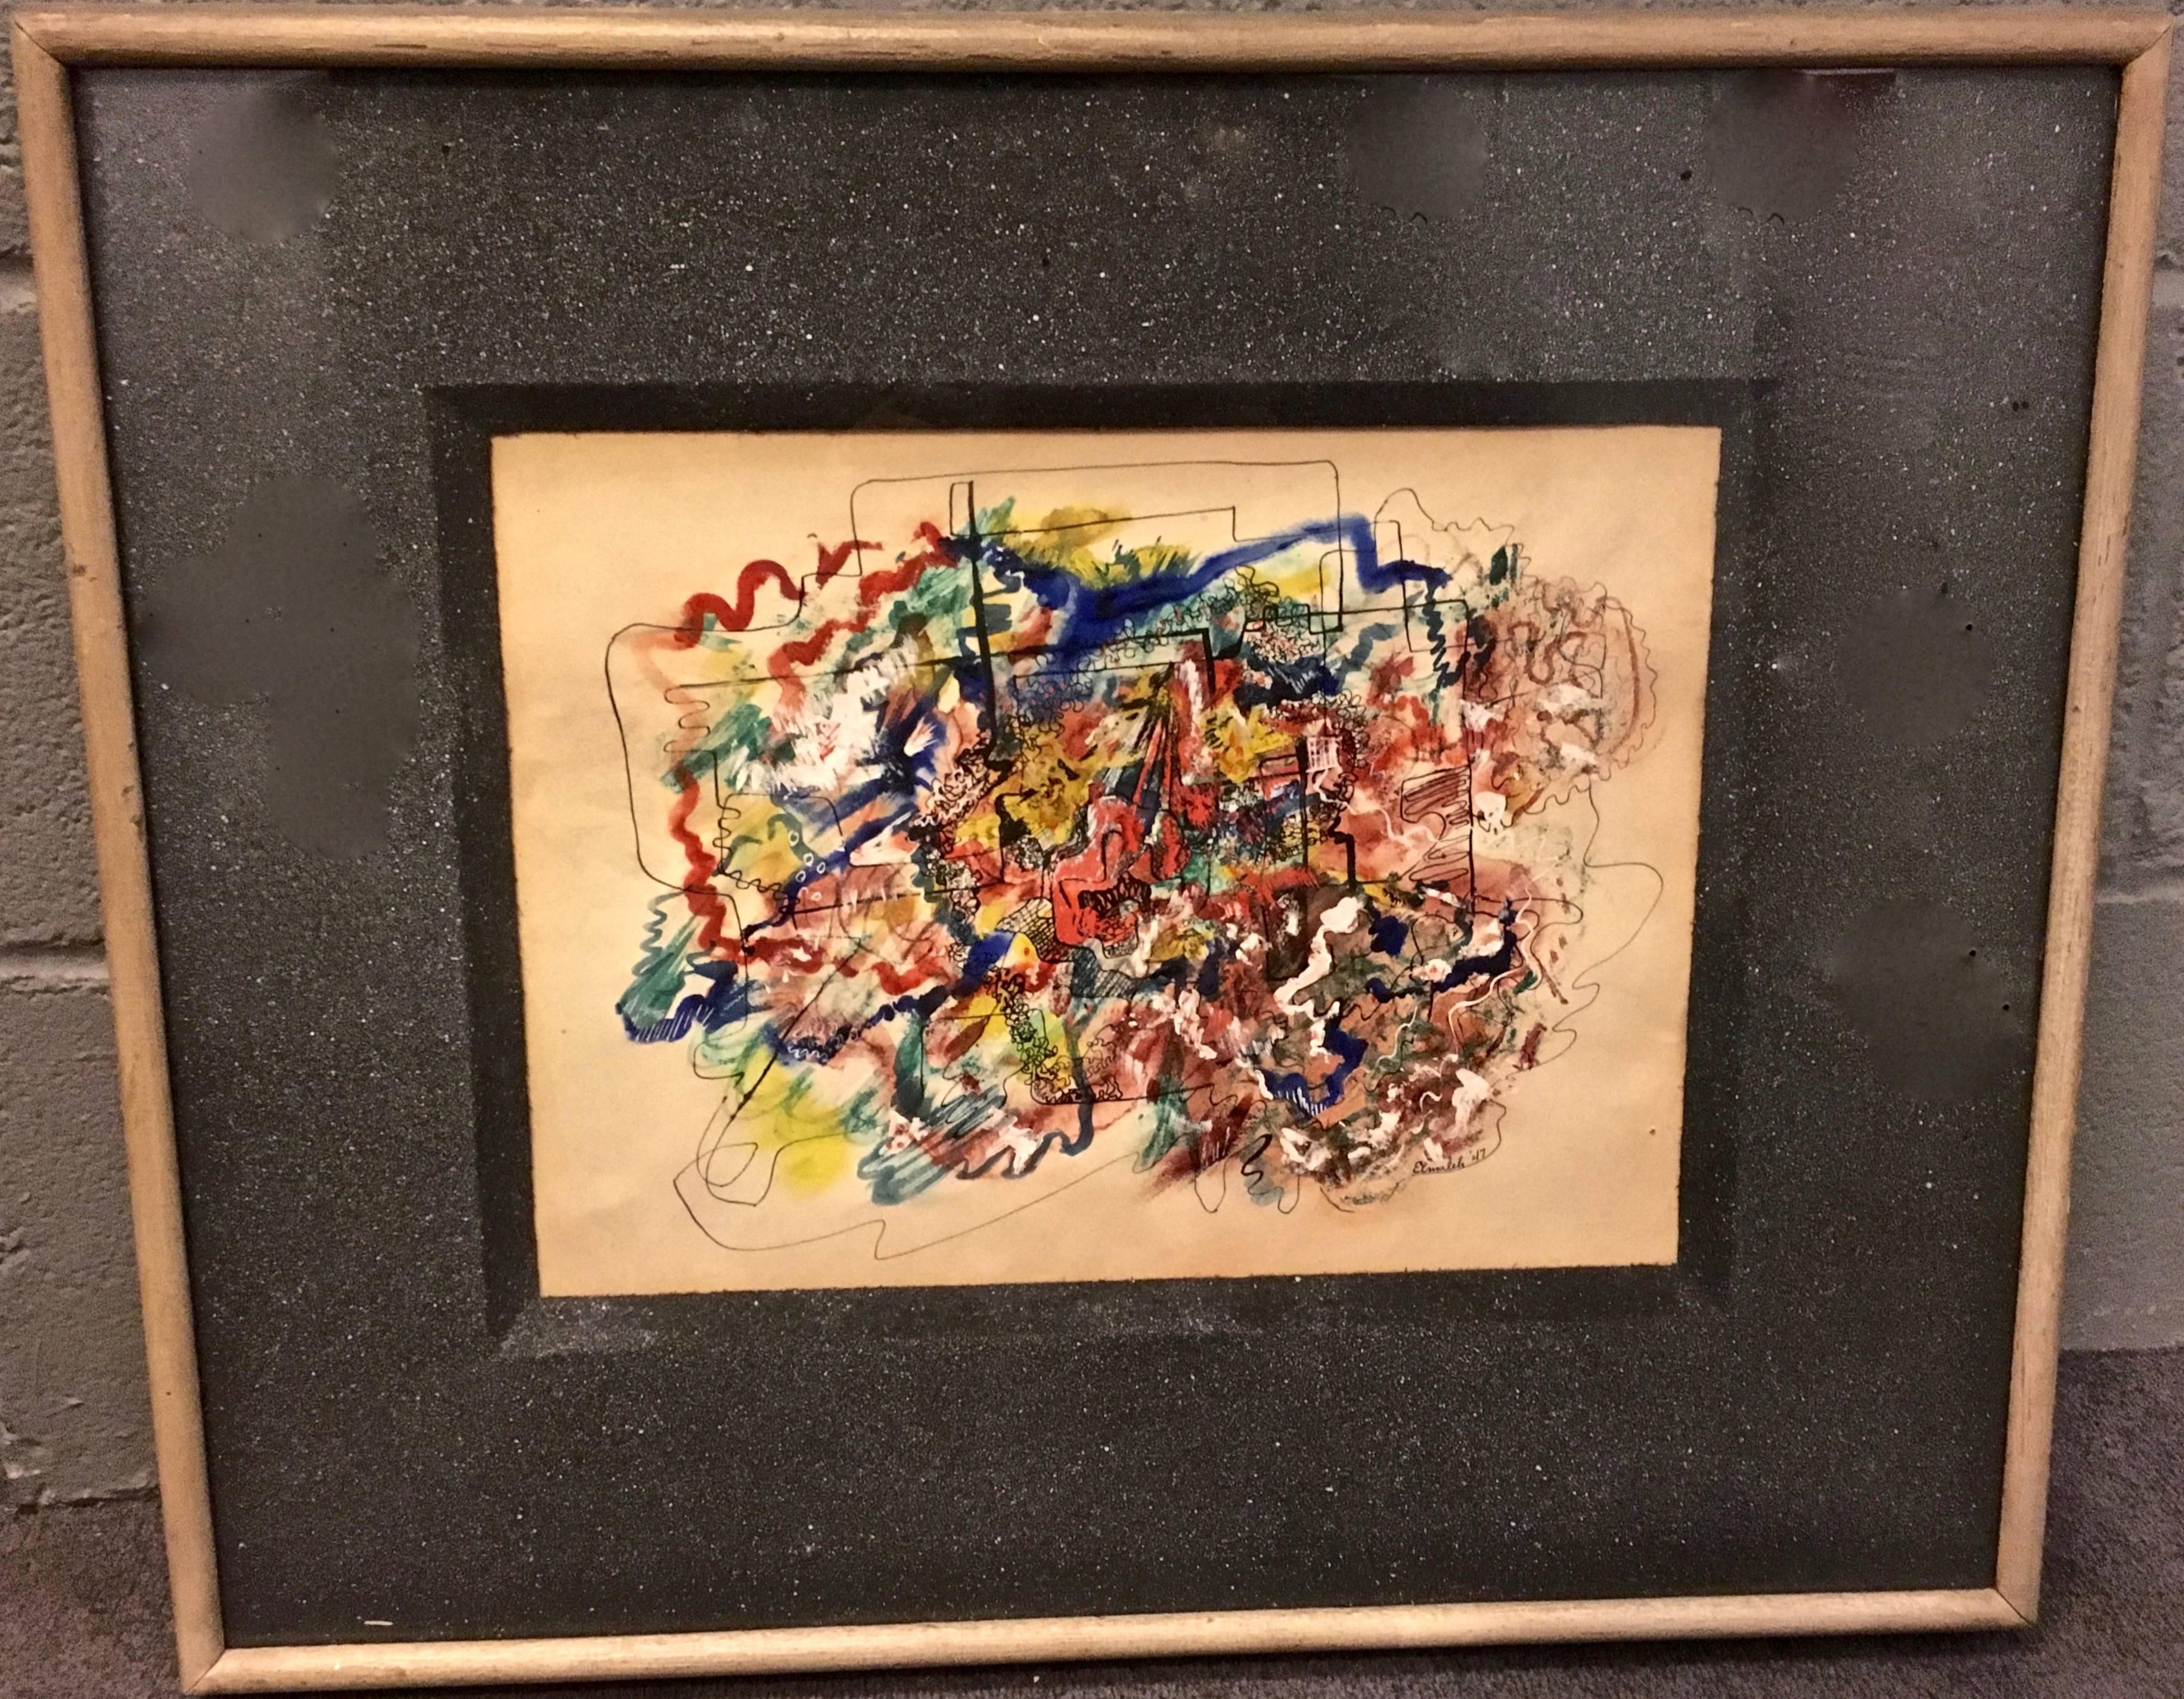 Victor Elmaleh (b.1918-2014) Watercolor on paper, Framed.
Signed and dated 1947

From John Canaday on Victor Elmaleh:

